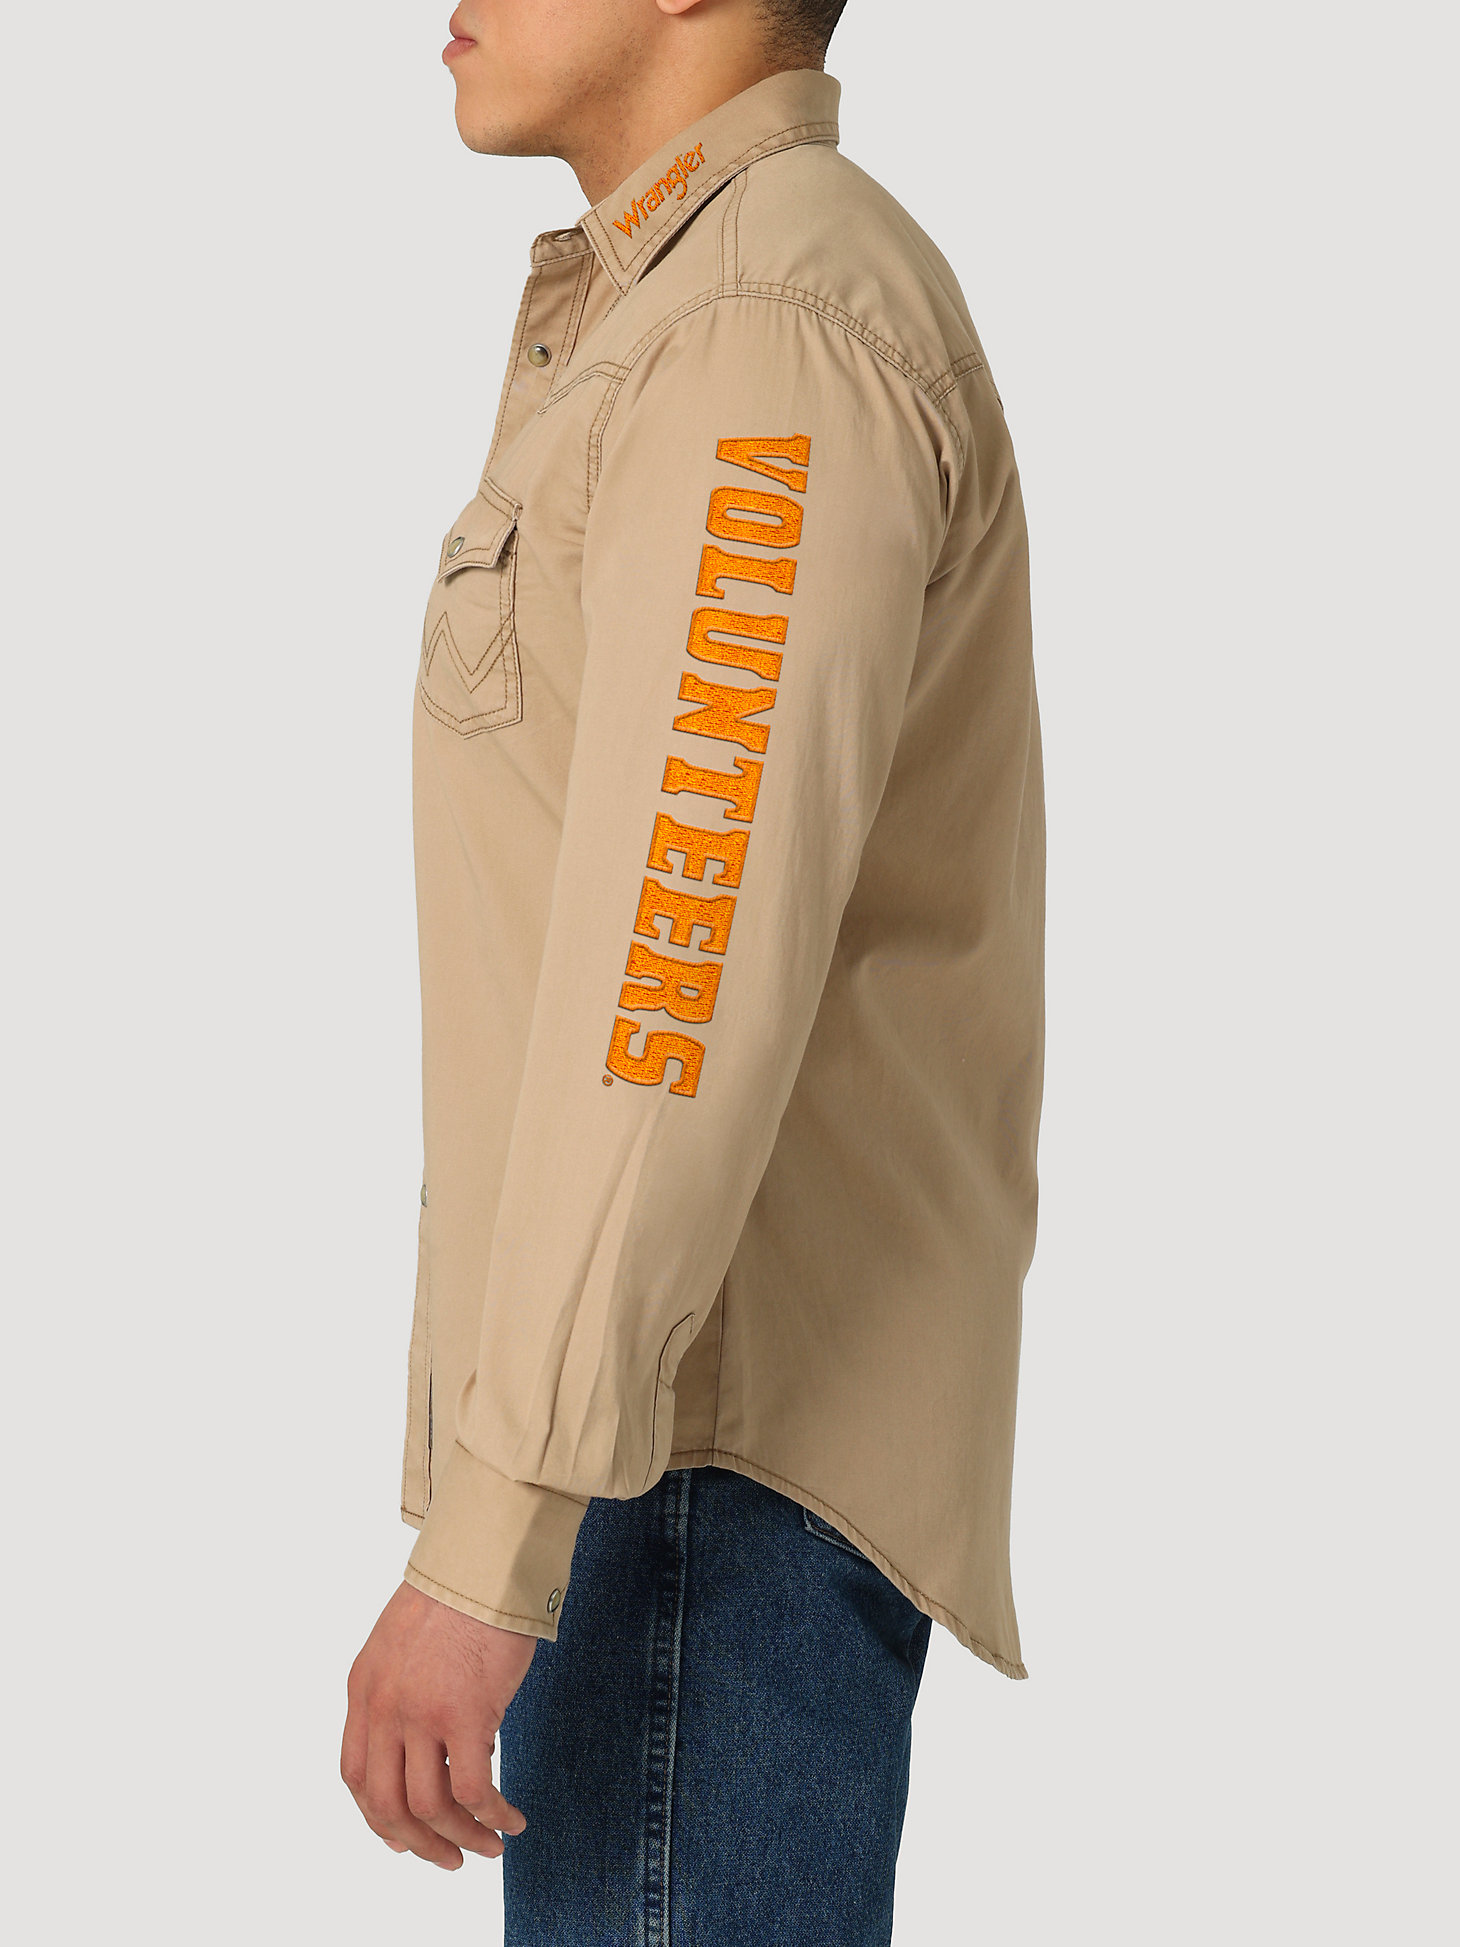 Wrangler Collegiate Embroidered Twill Western Snap Shirt in University of Tennessee alternative view 2